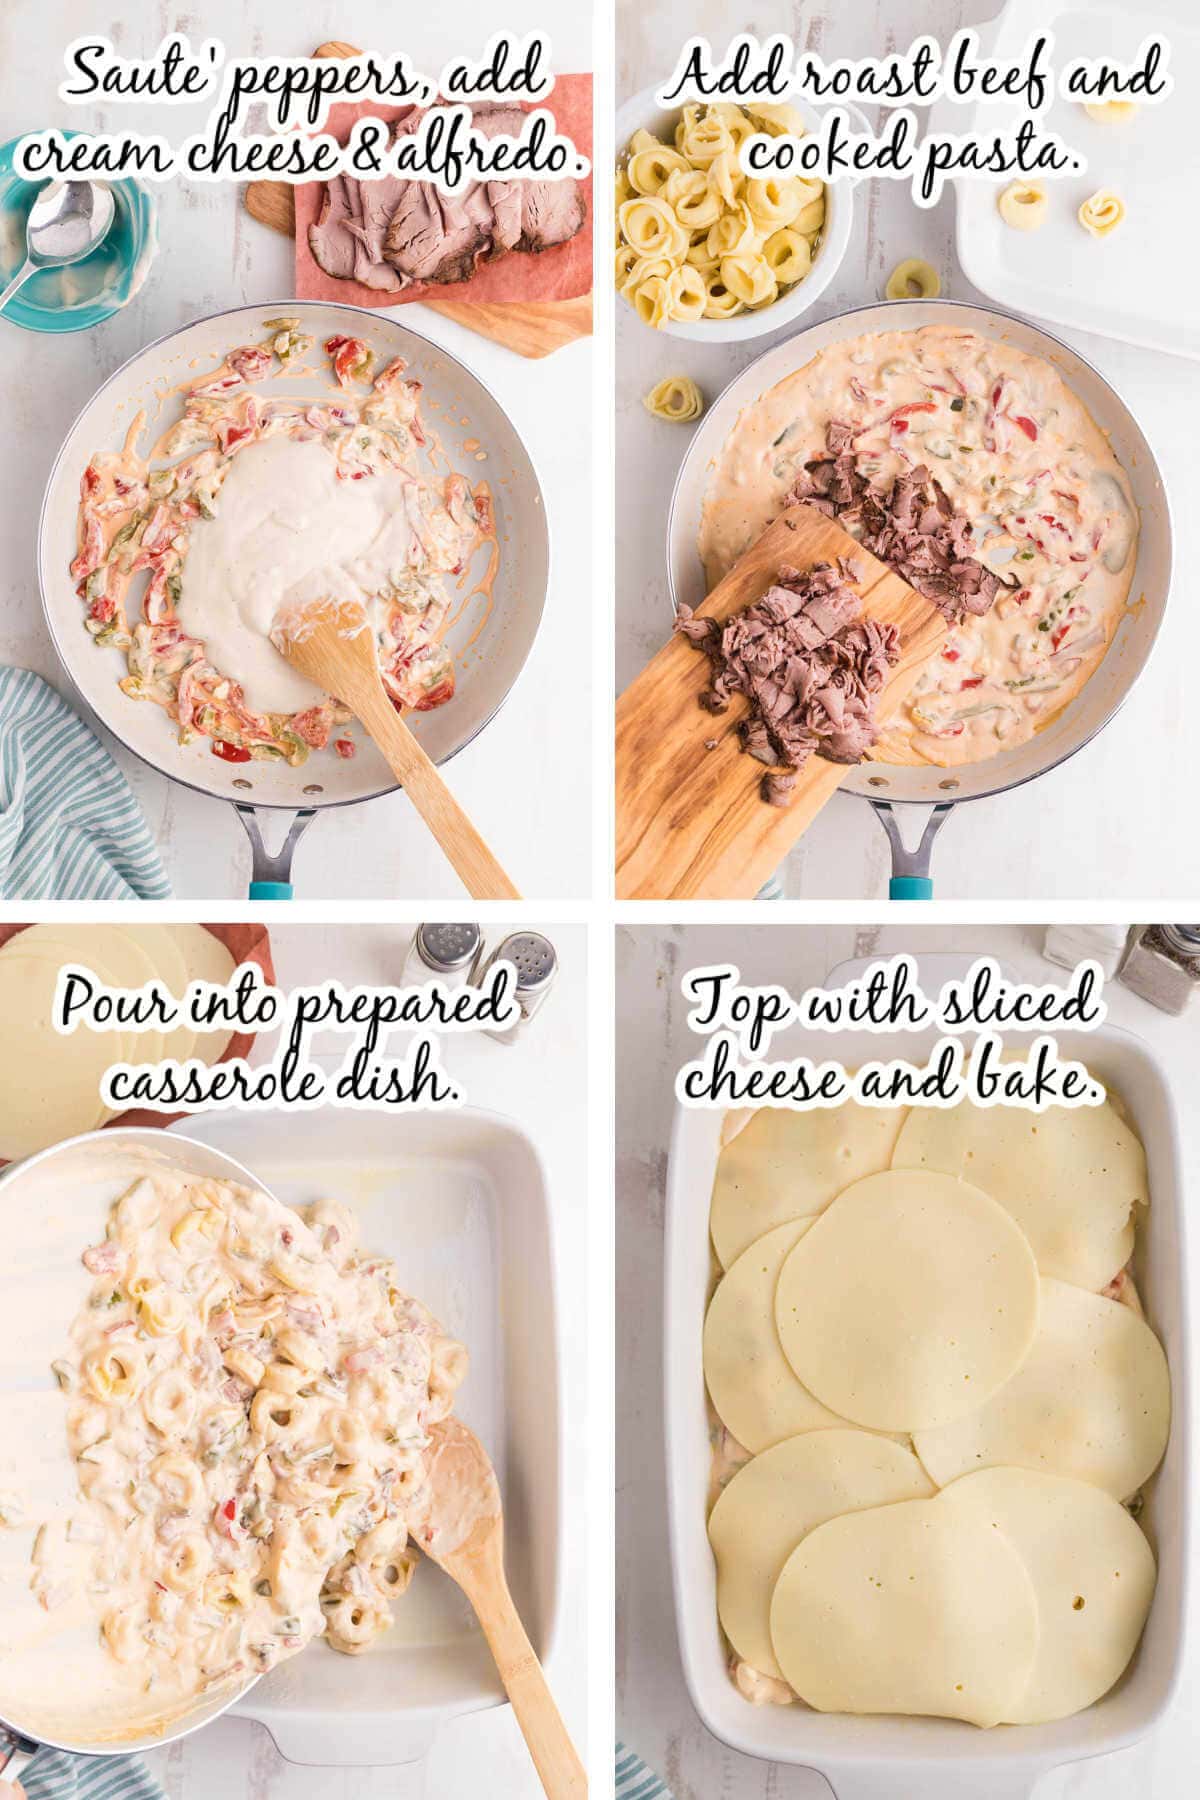 Step by step instructions to make cheese steak pasta bake.